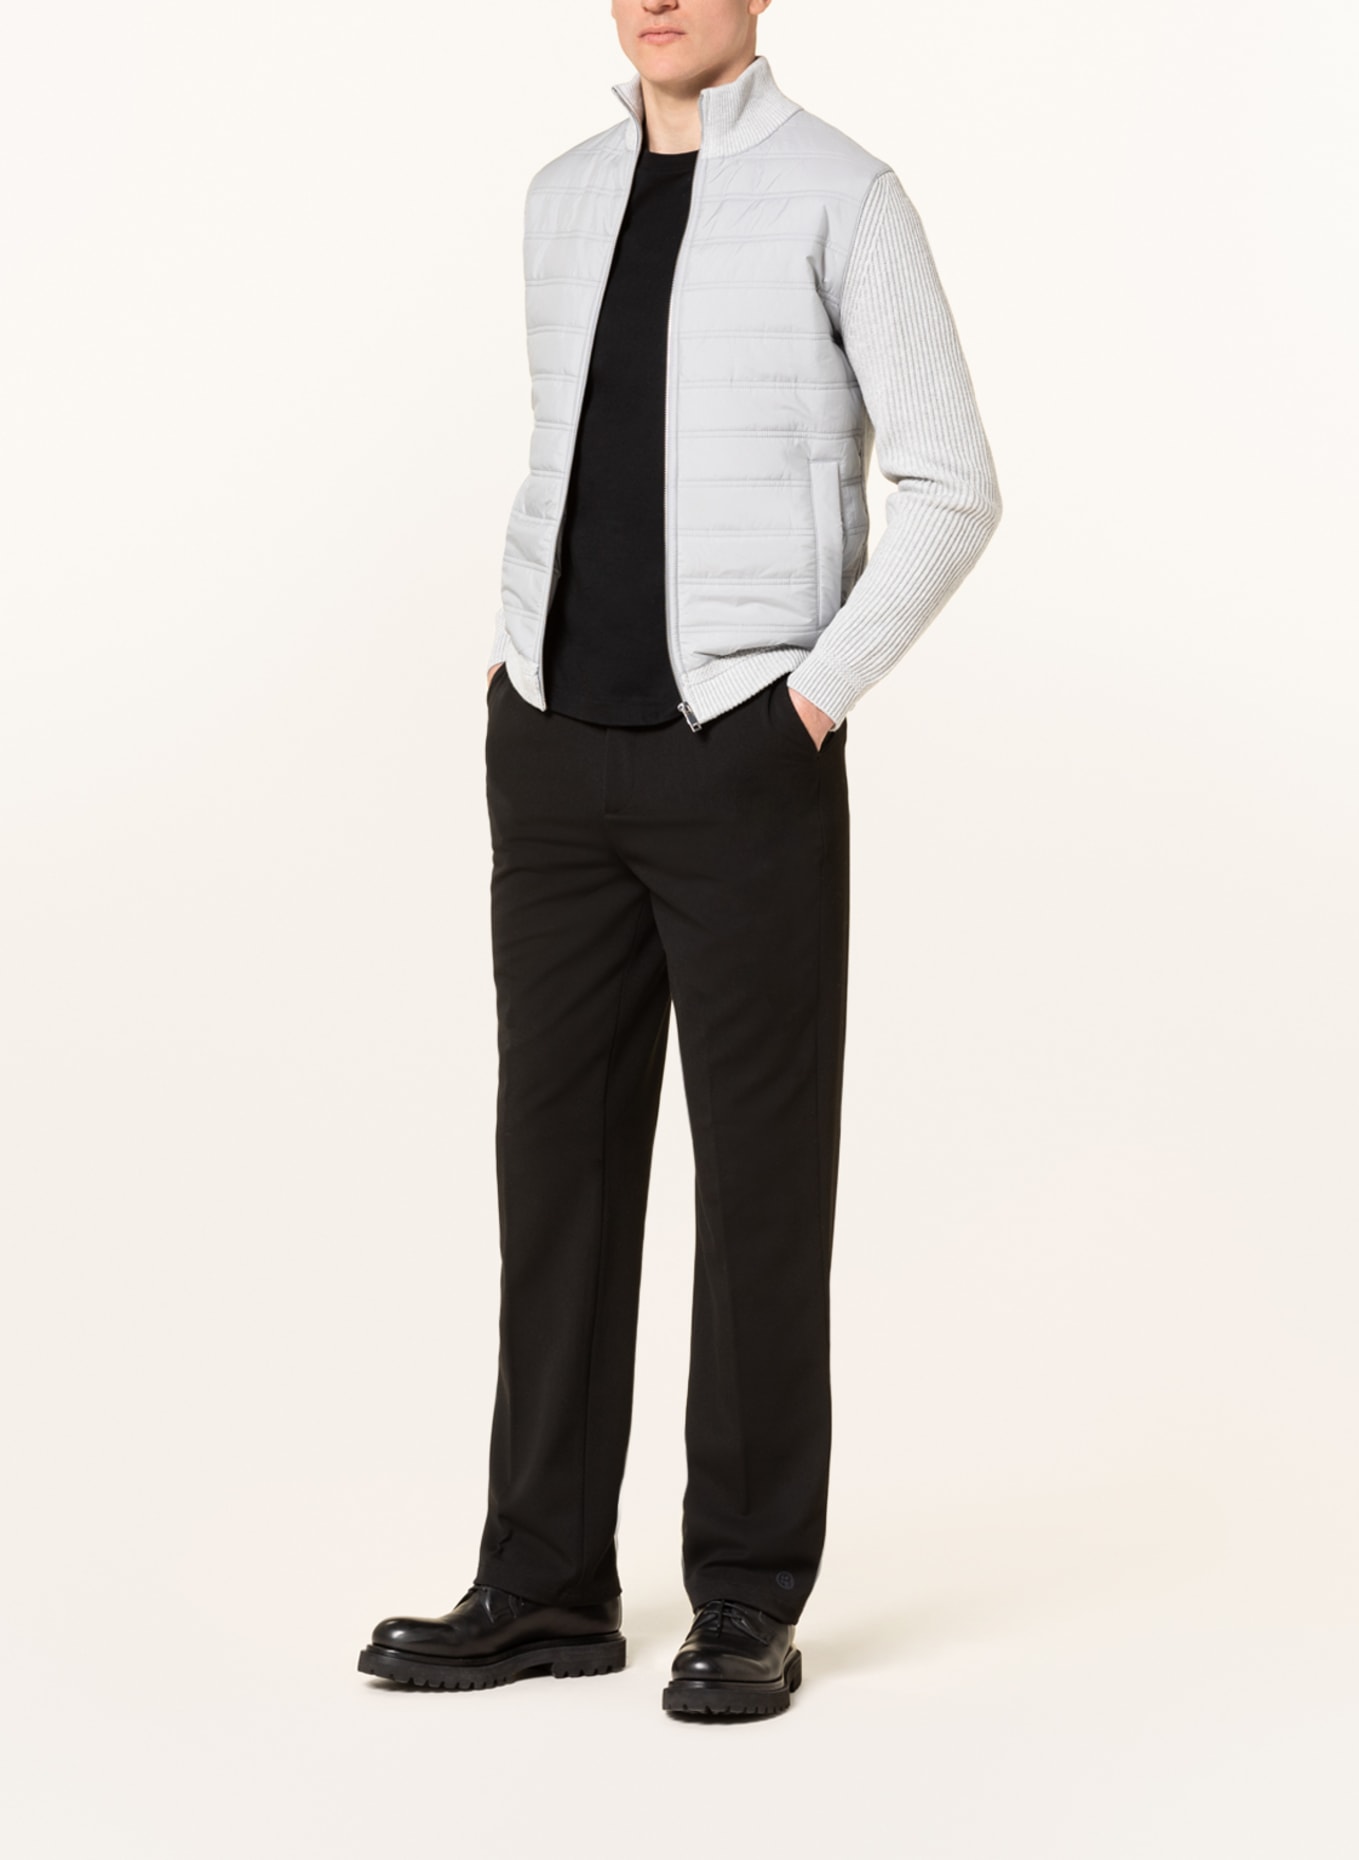 REISS Jacket TRAINER in mixed materials, Color: LIGHT GRAY (Image 2)